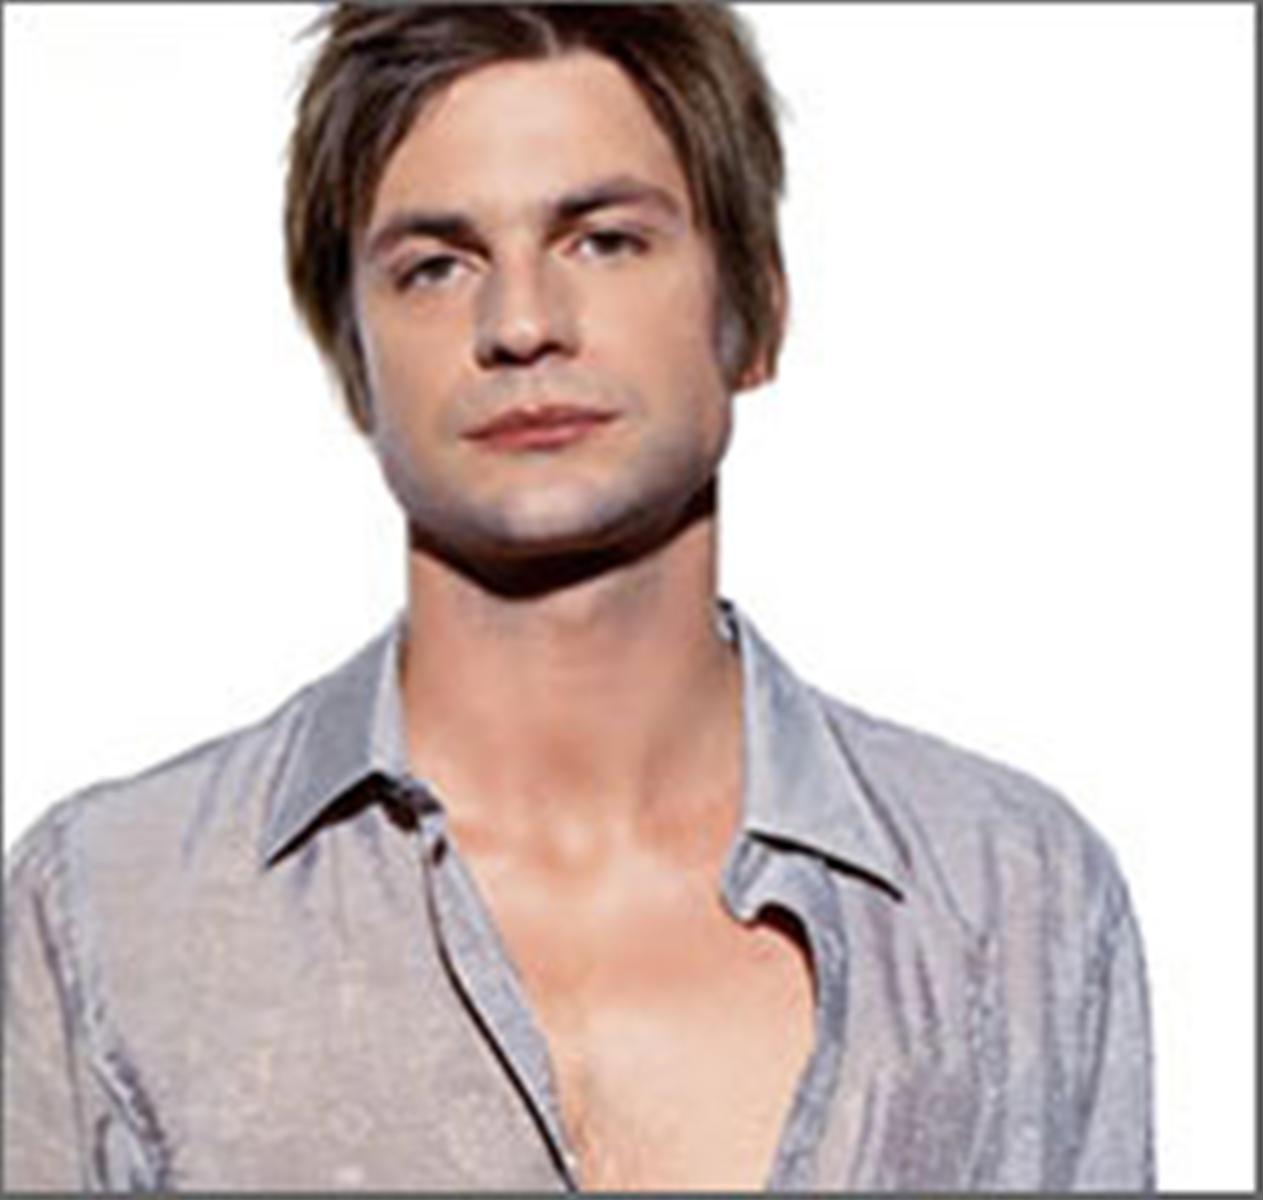 gale-harold-images